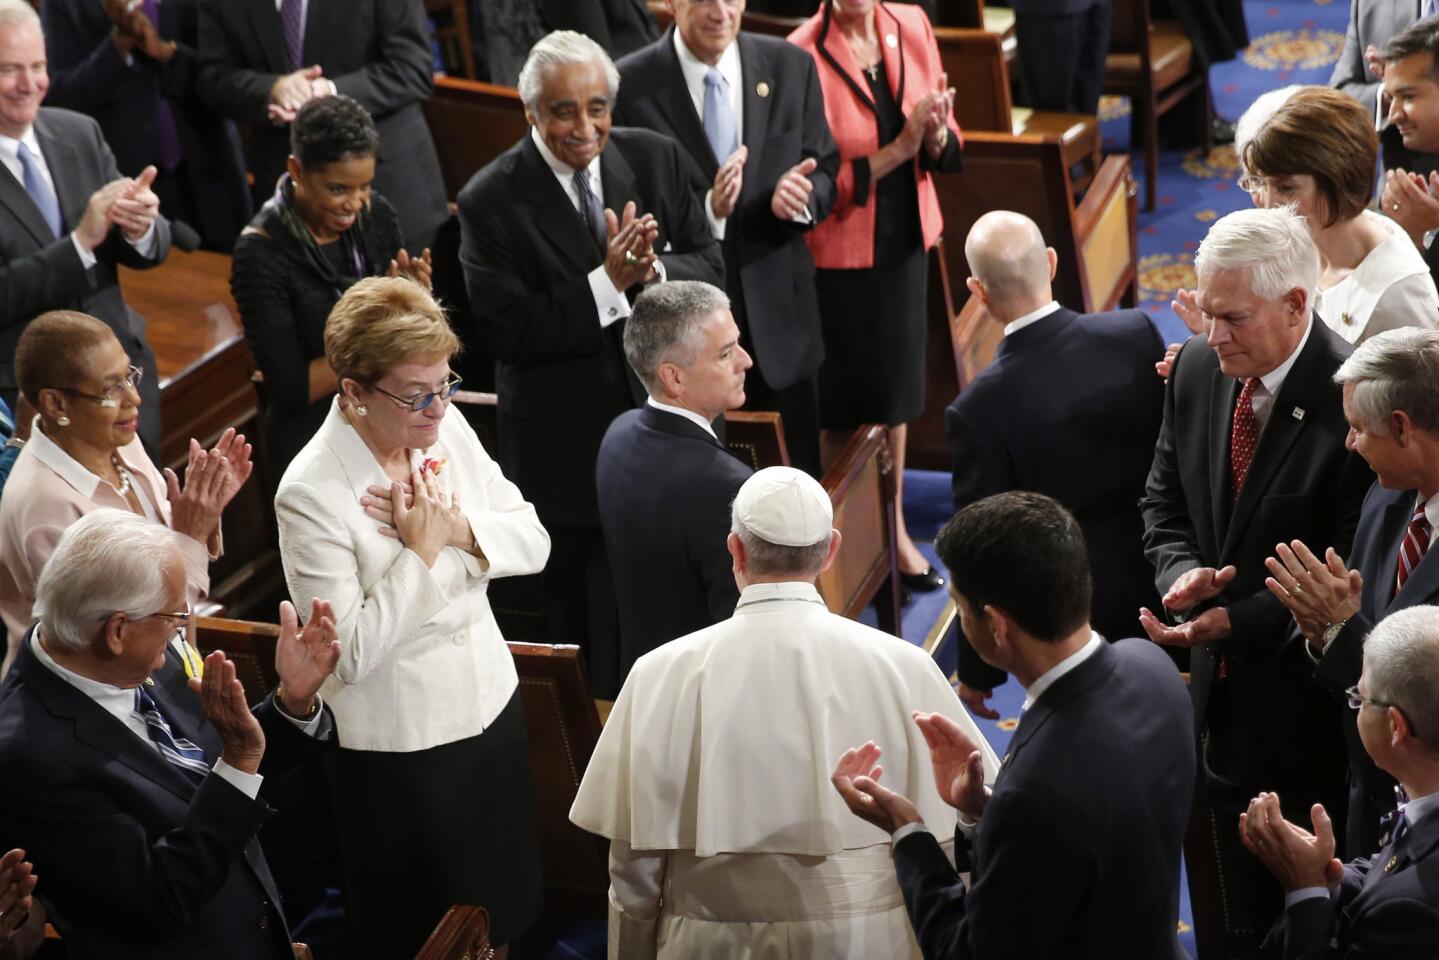 Pope Francis is applauded as he arrives on Capitol Hill on Sept. 24, 2015, to address a joint meeting of Congress, making history as the first pontiff to do so.